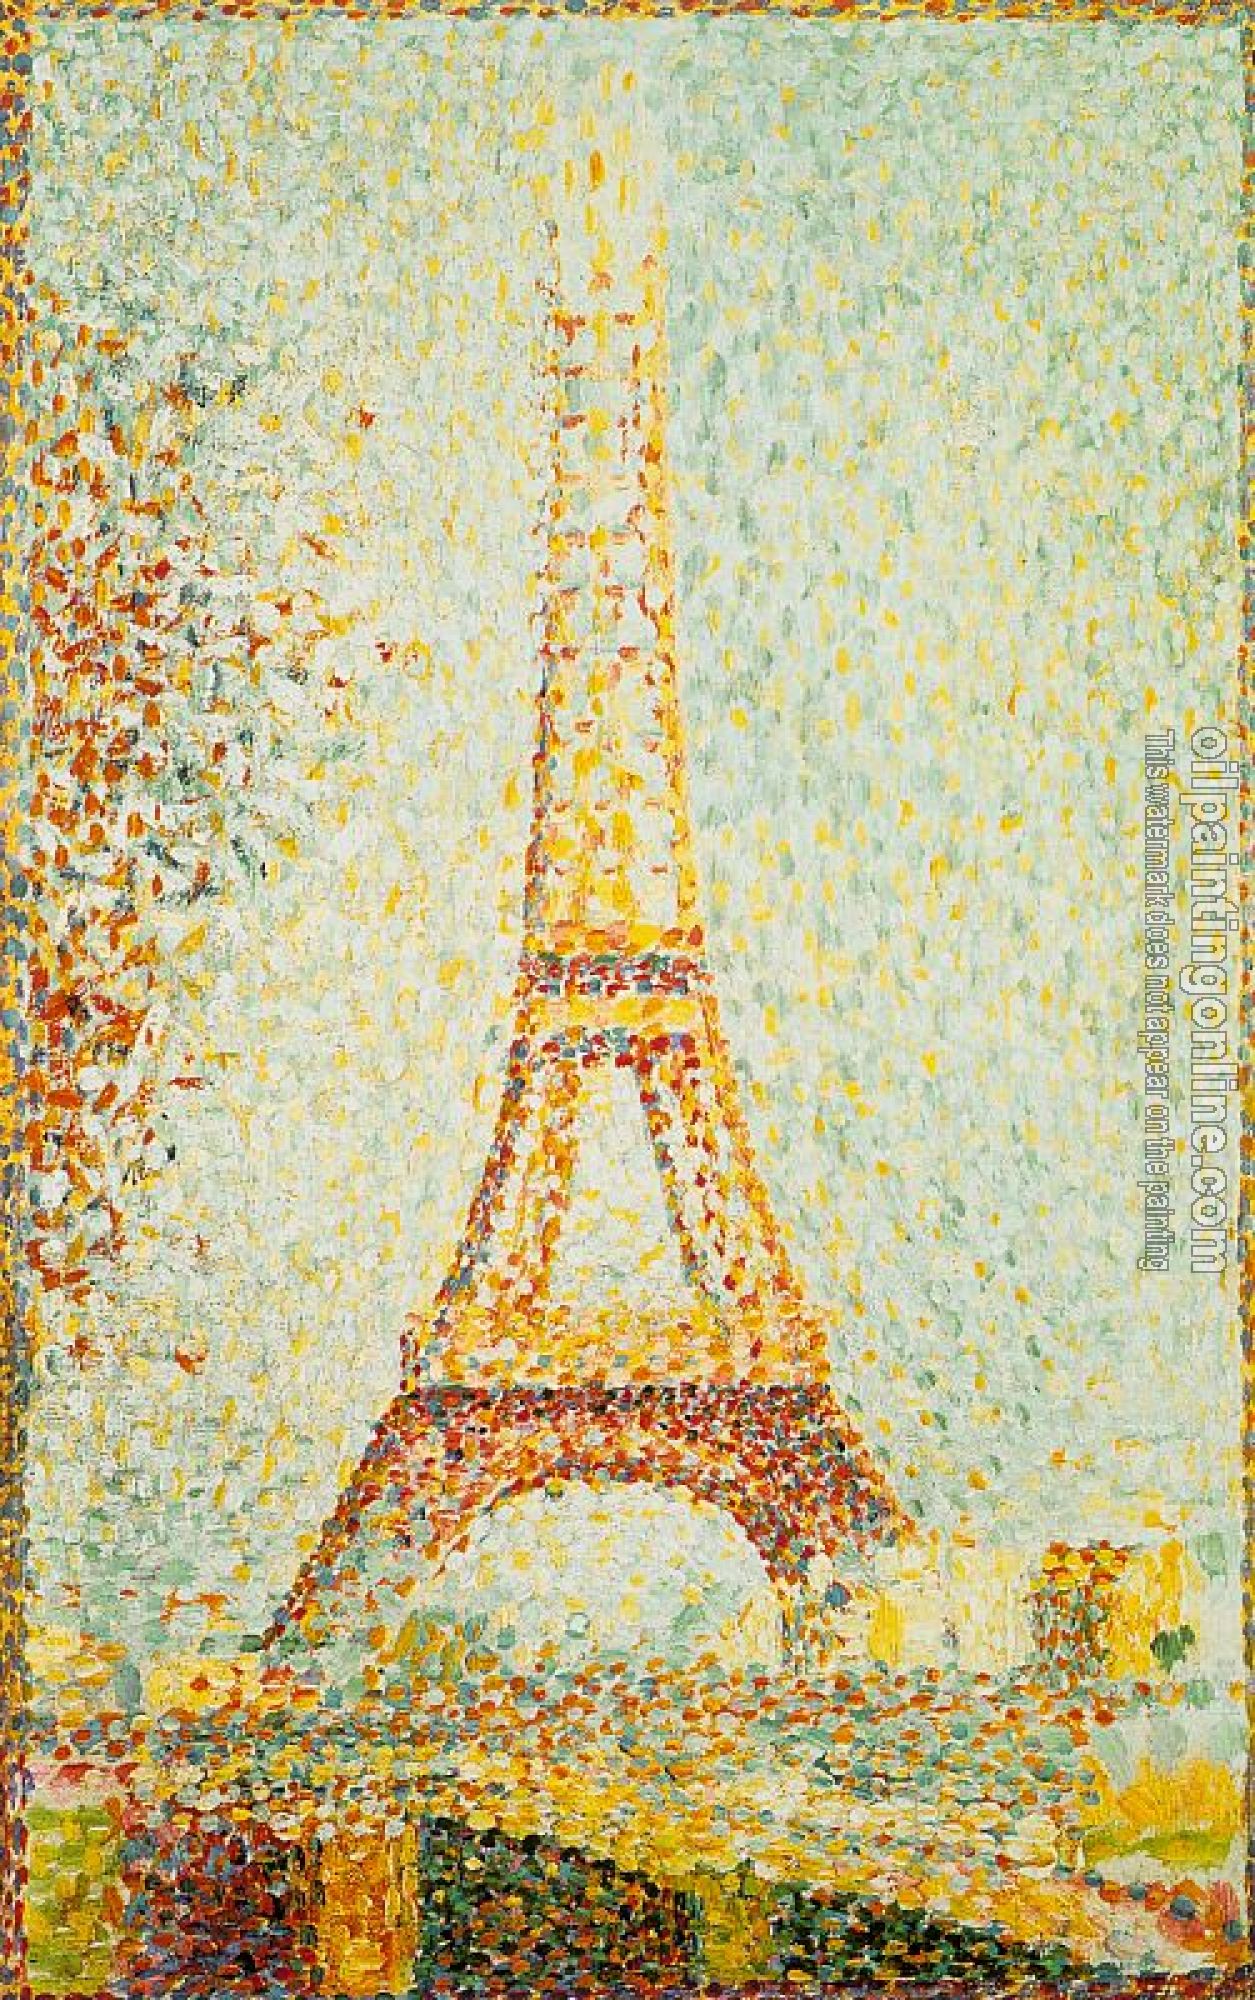 Seurat, Georges - The Eiffel Tower